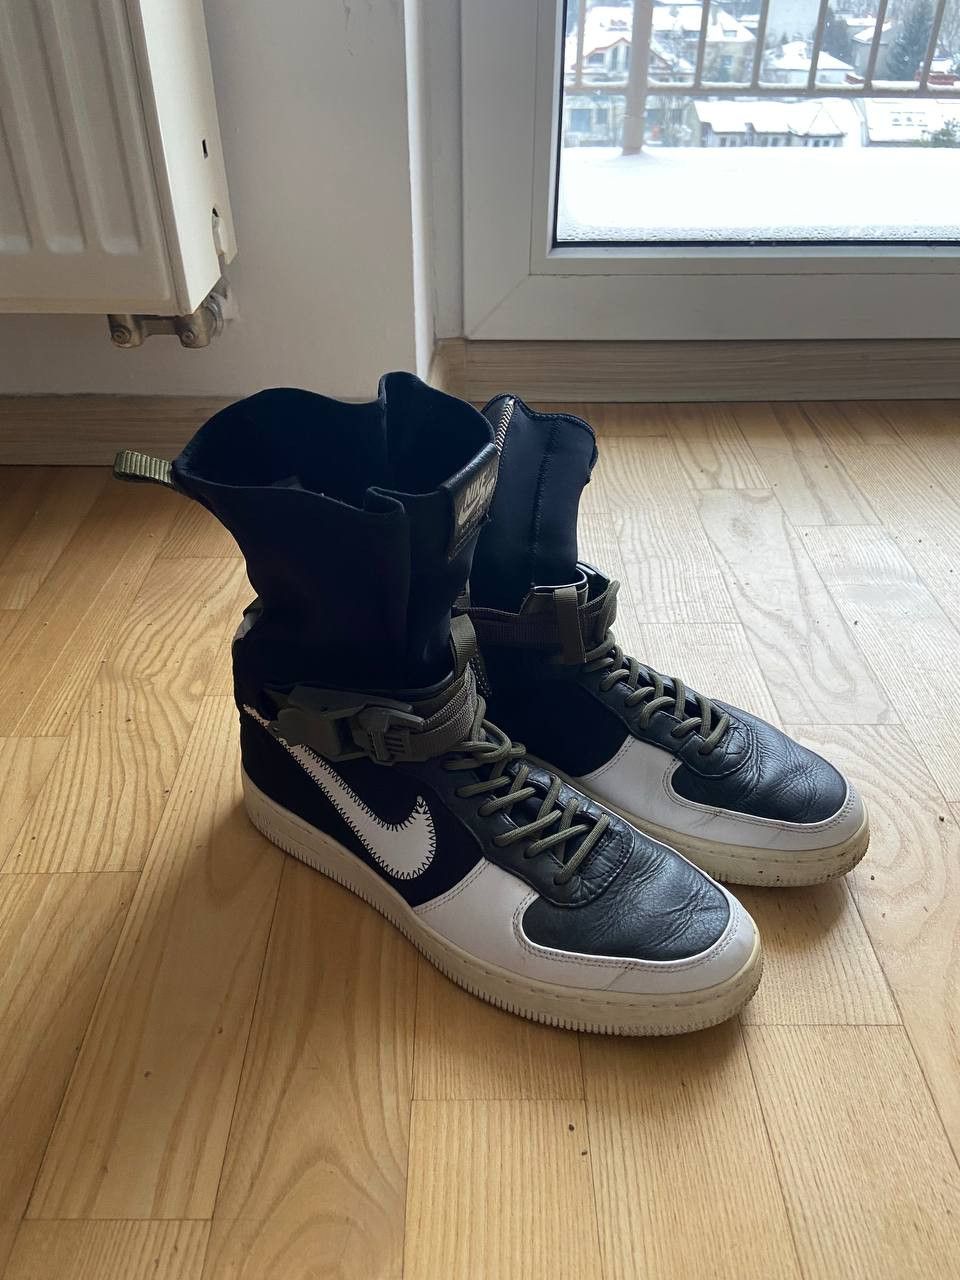 Nike Acronym Air Force Downtown 1 | Grailed